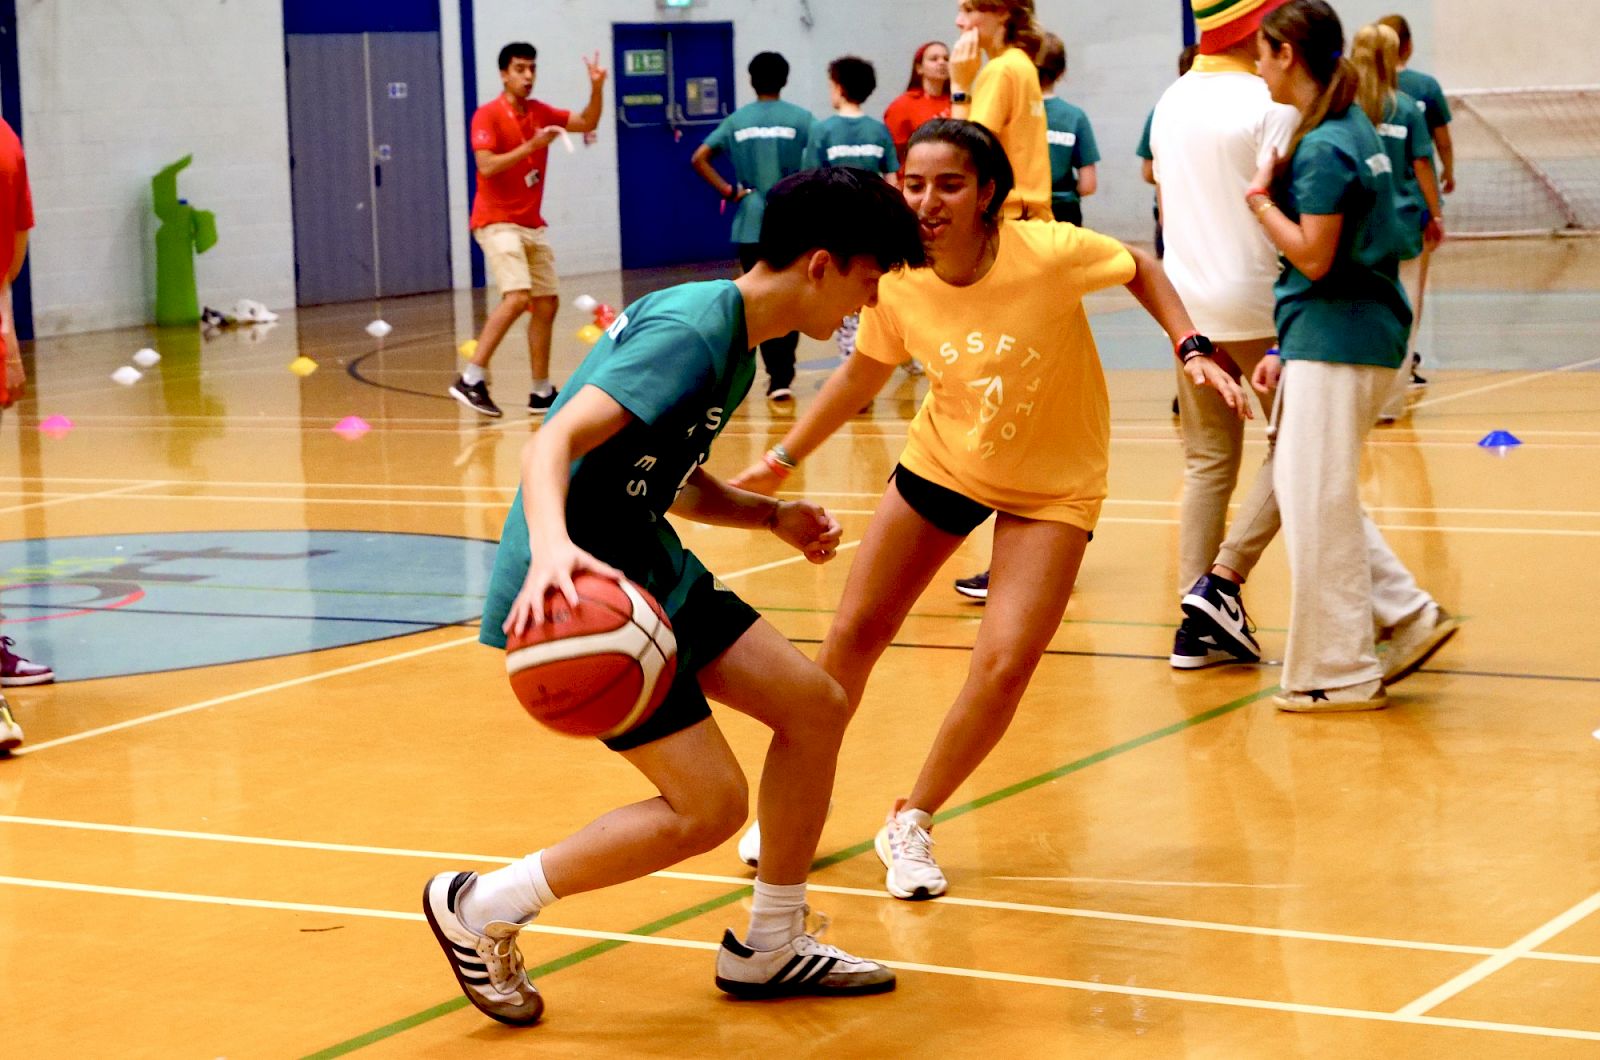 ISSFT students playing Basketball